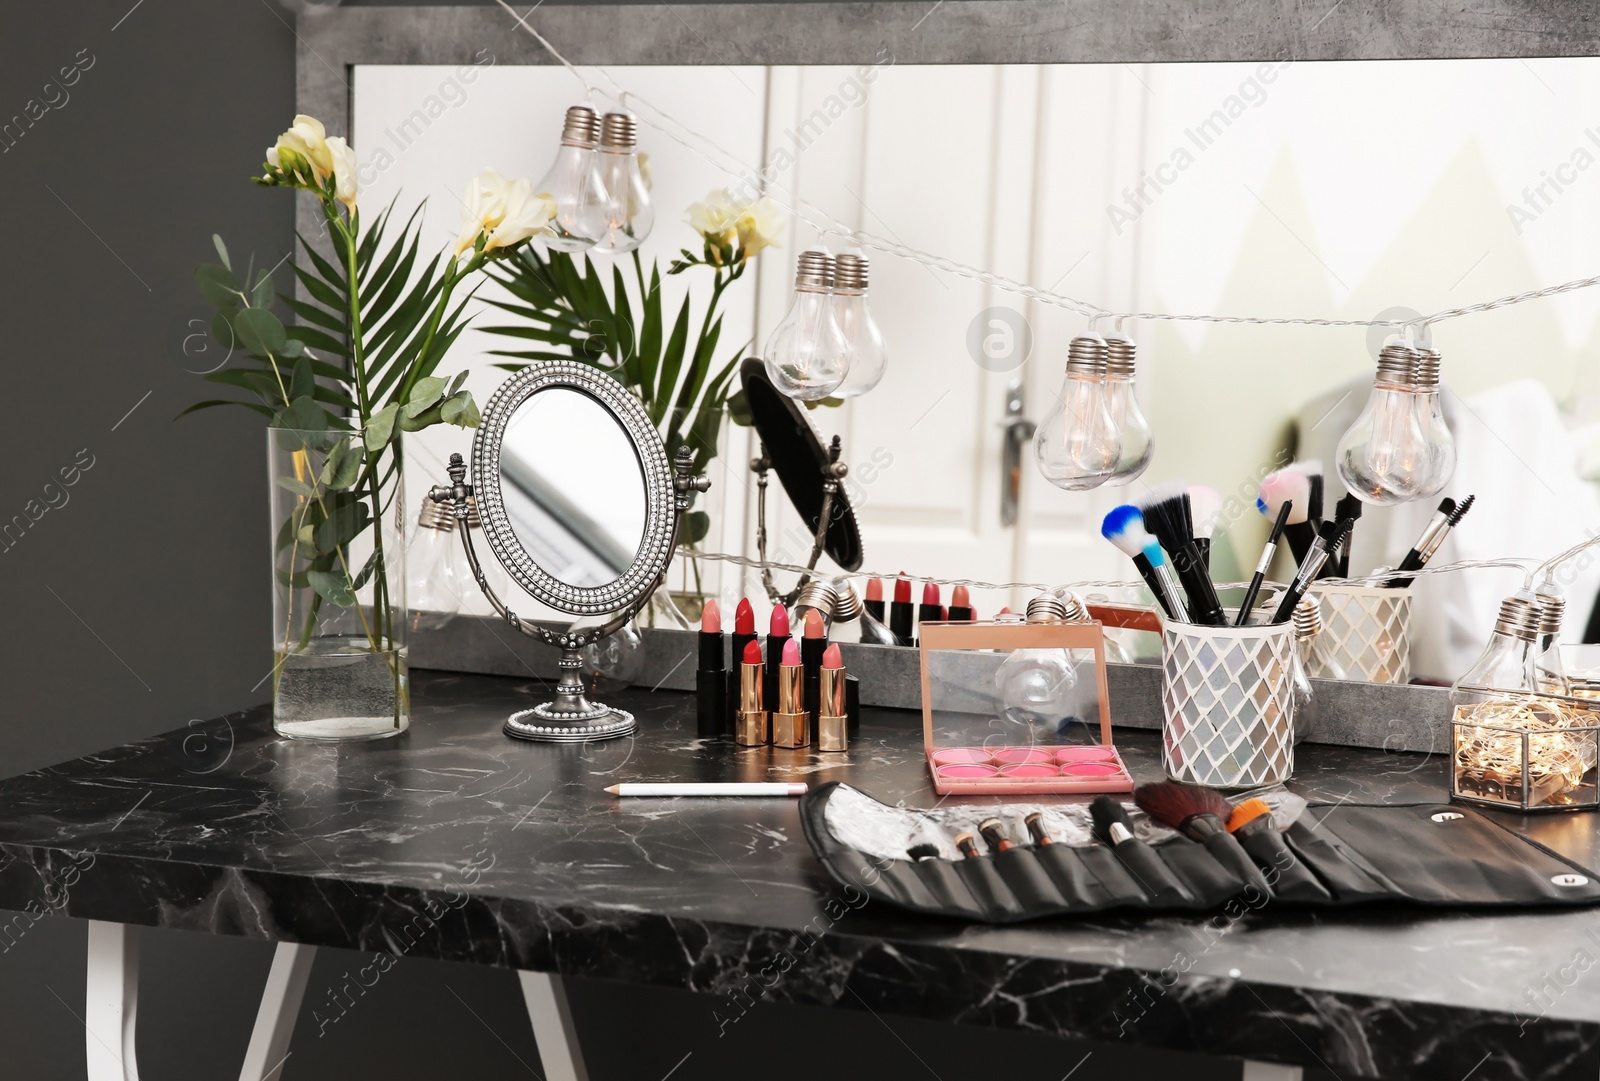 Photo of Decorative cosmetics and tools on dressing table in makeup room